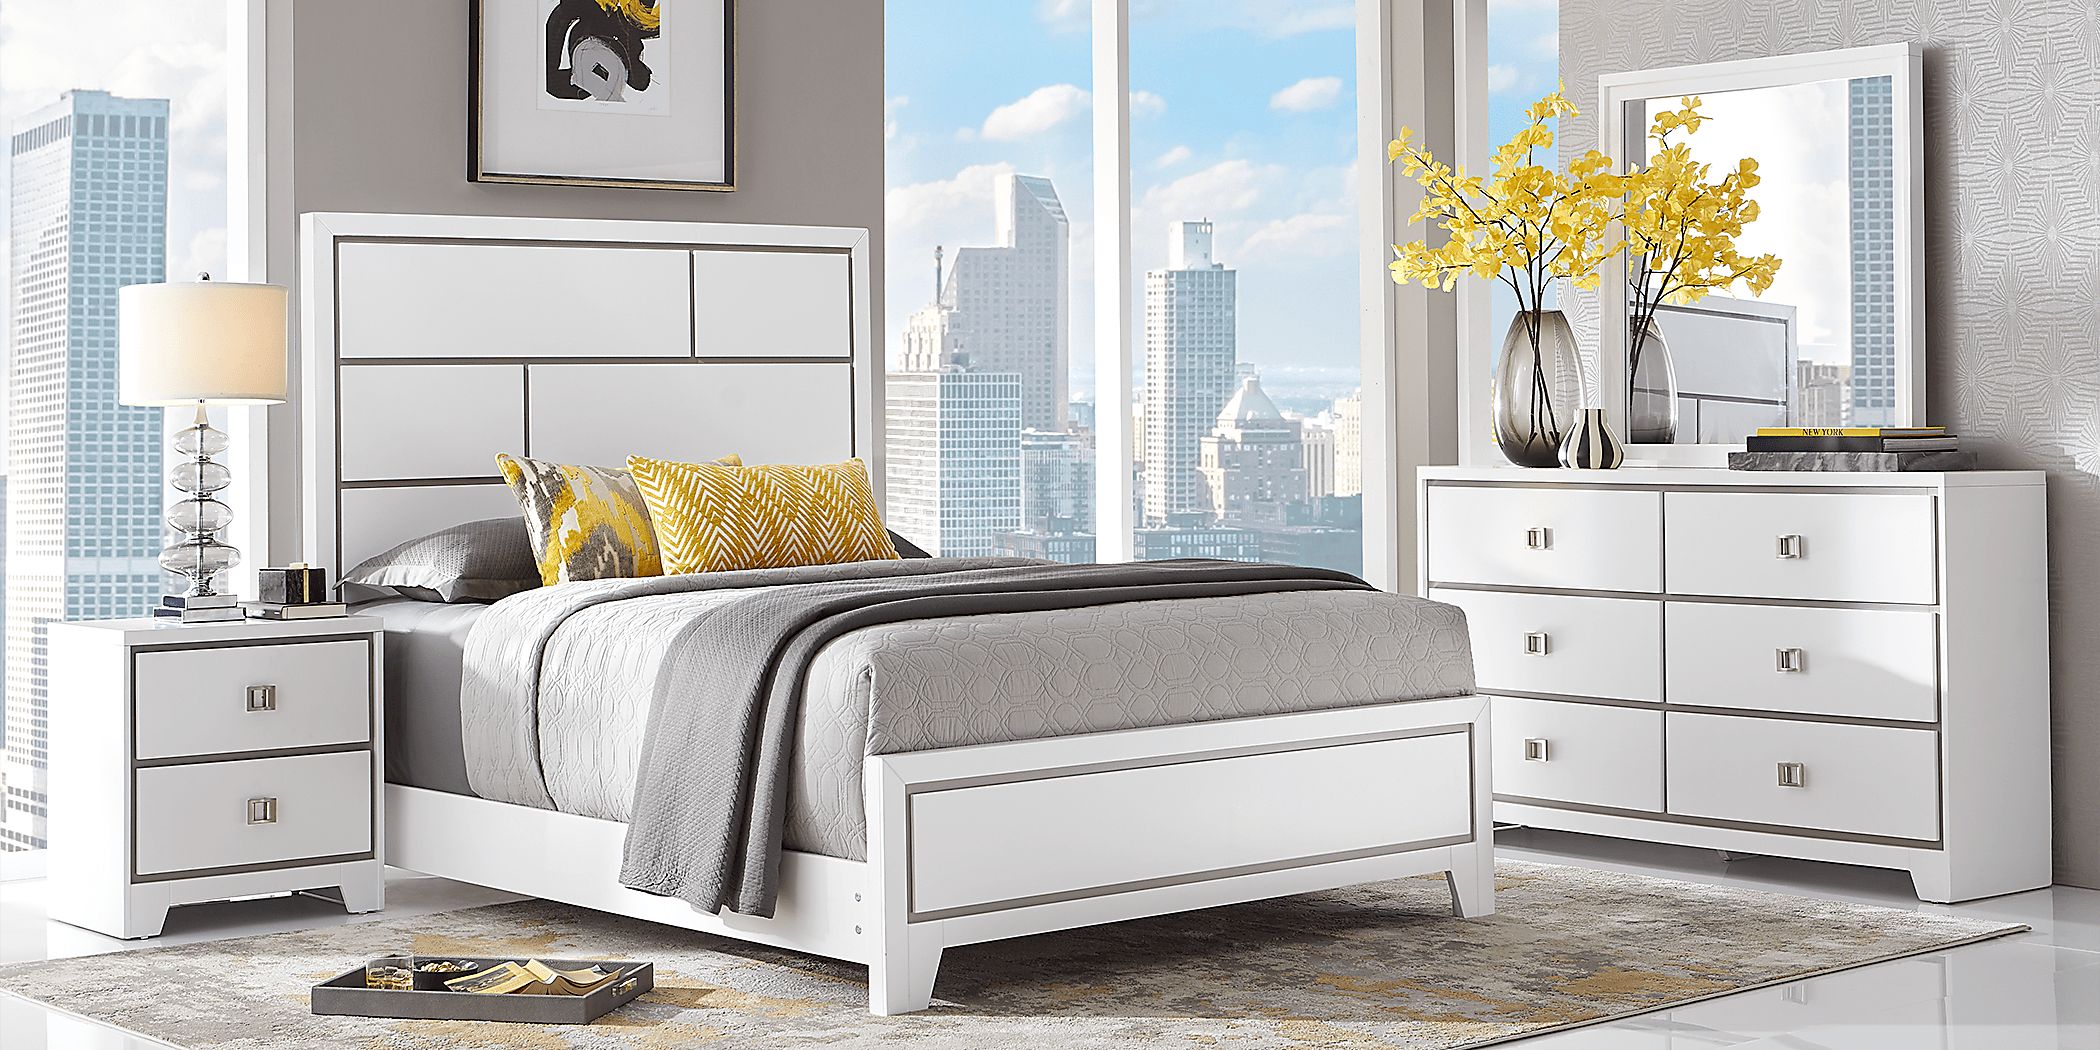 Princeton Hall White 5 Pc Queen Bedroom